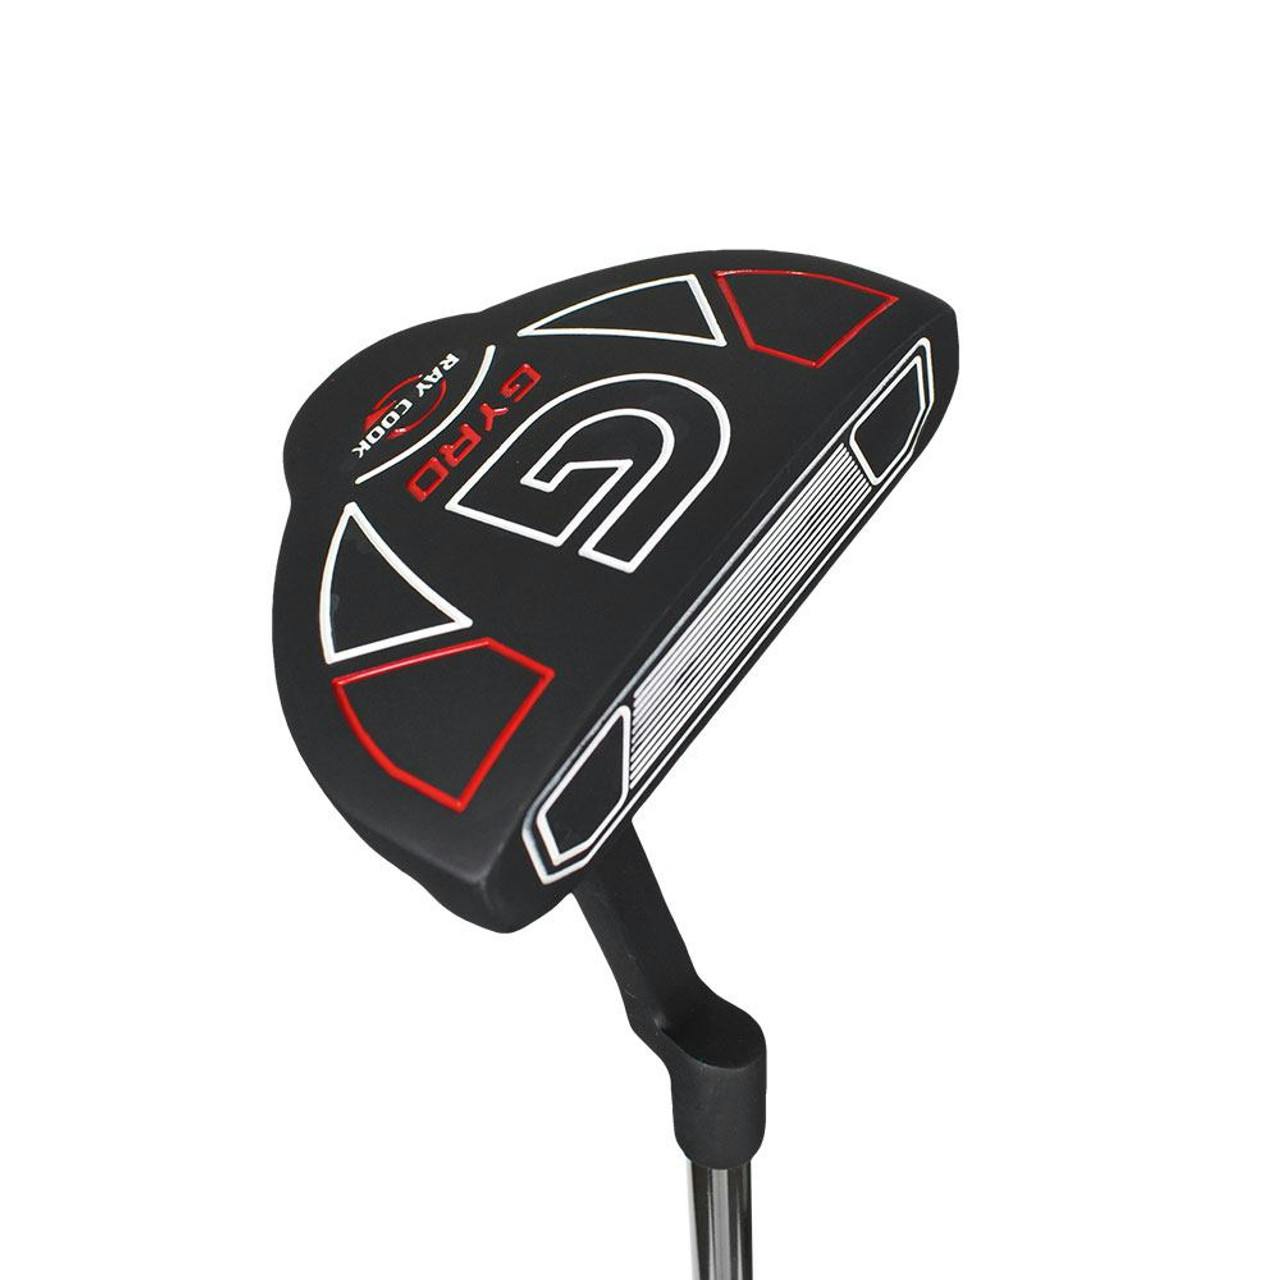 Ray Cook Gyro Men's Complete Set · Right Handed · Steel · Uniflex · Red/Black/White